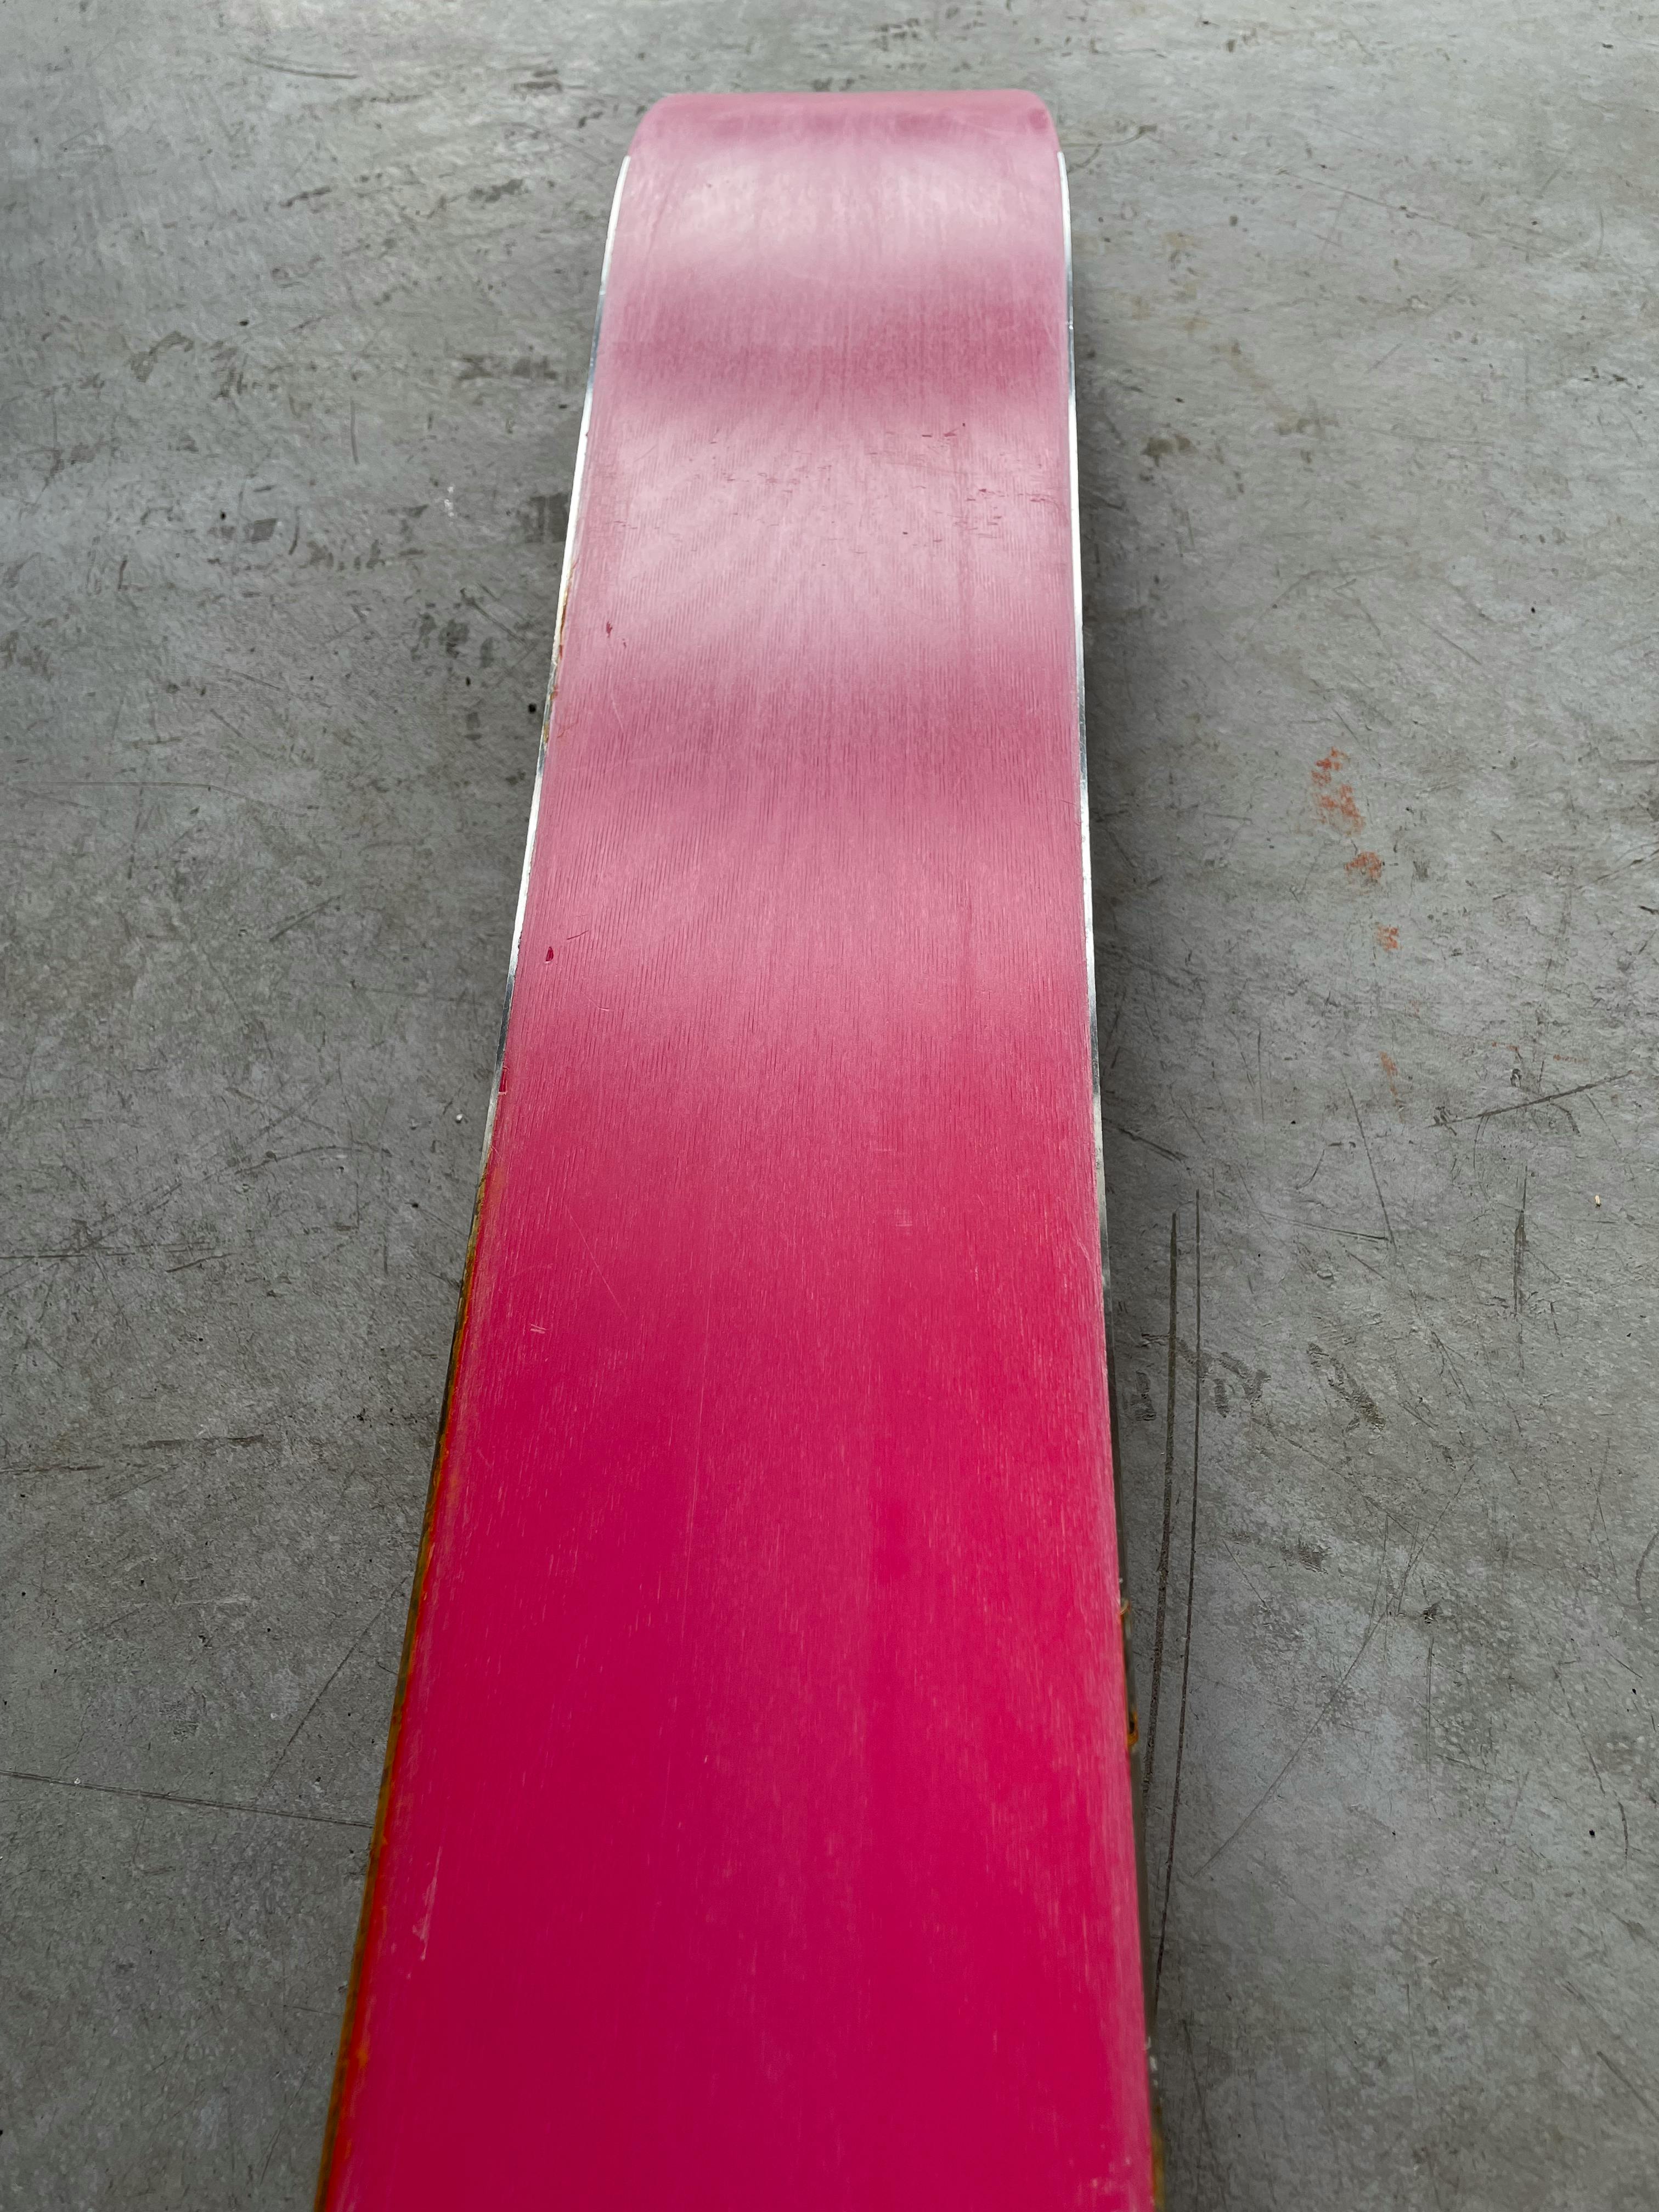 A view of the underside of the author's ski.